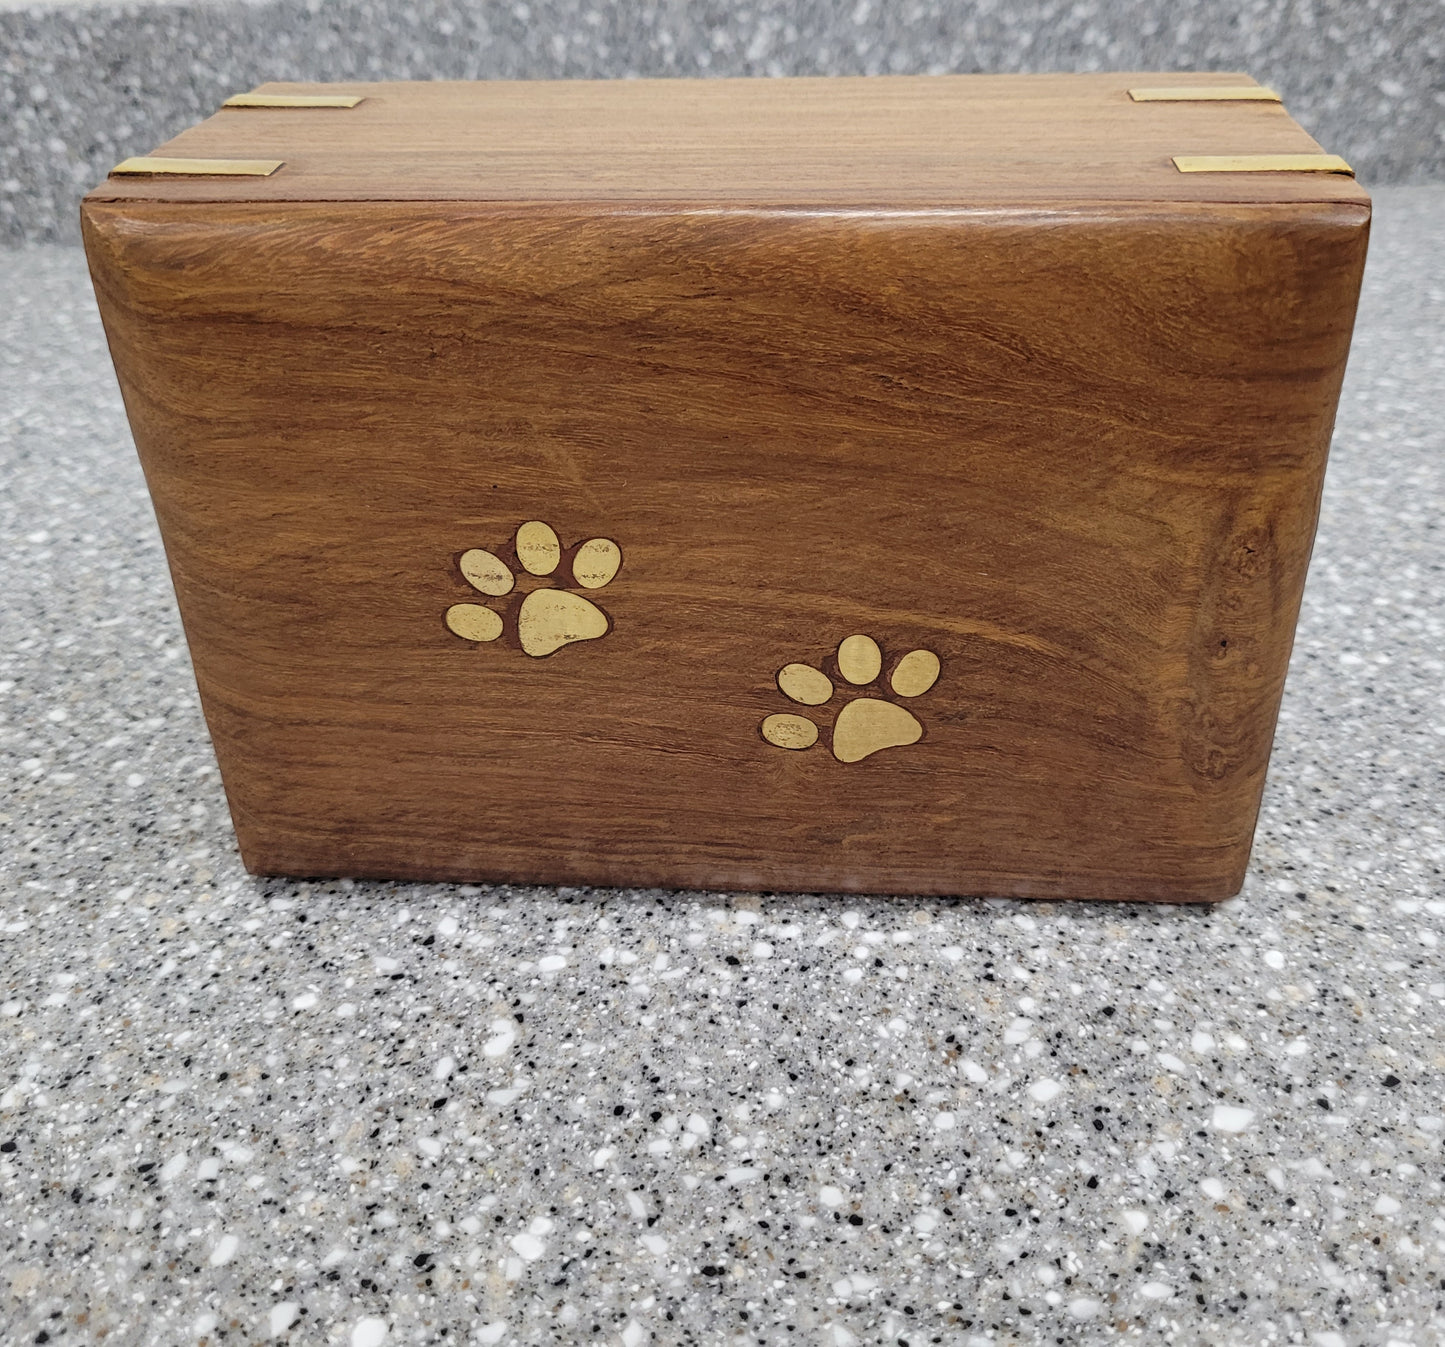 Rosewood Pet Urn with Brass Paws and Corners